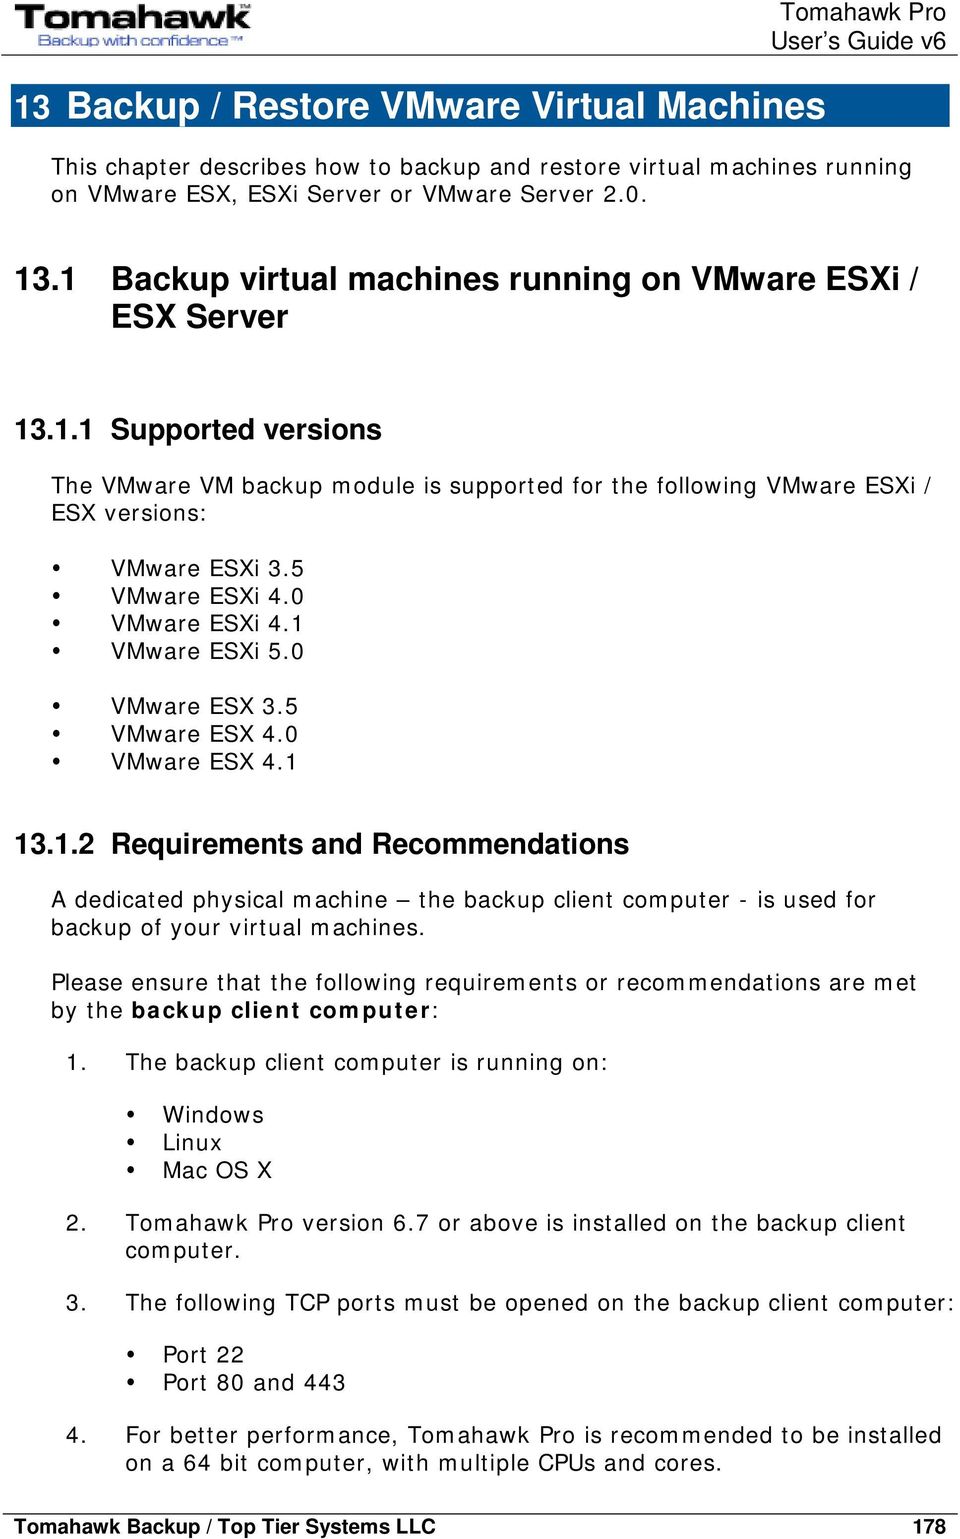 5 VMware ESXi 4.0 VMware ESXi 4.1 VMware ESXi 5.0 VMware ESX 3.5 VMware ESX 4.0 VMware ESX 4.1 13.1.2 Requirements and Recommendations A dedicated physical machine the backup client computer - is used for backup of your virtual machines.